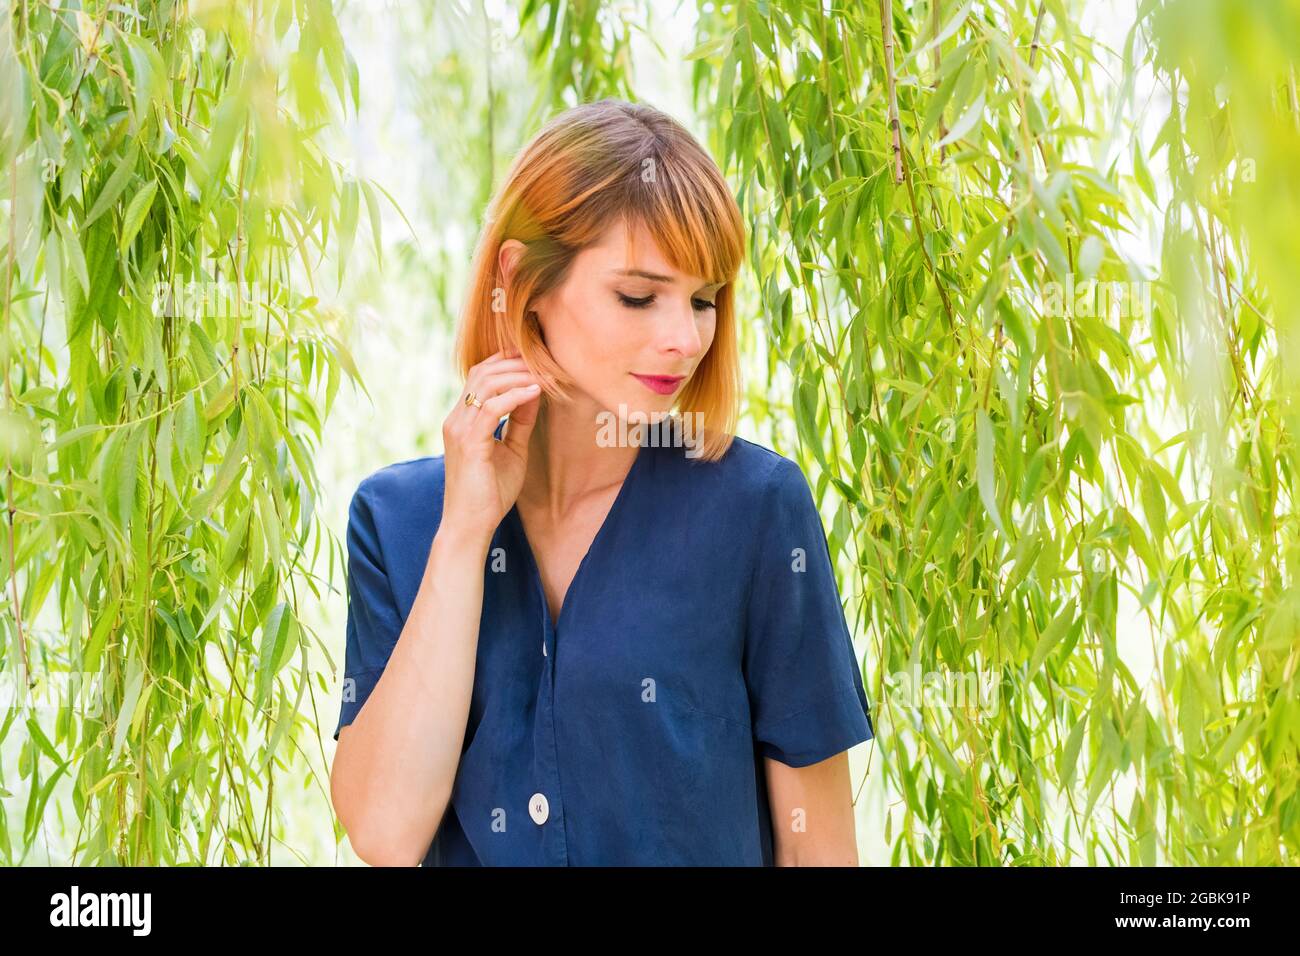 Portrait of a beautiful serene redhead woman under a weeping willow tree looking down with a quiet meditative expression and hand gracefully raised to Stock Photo